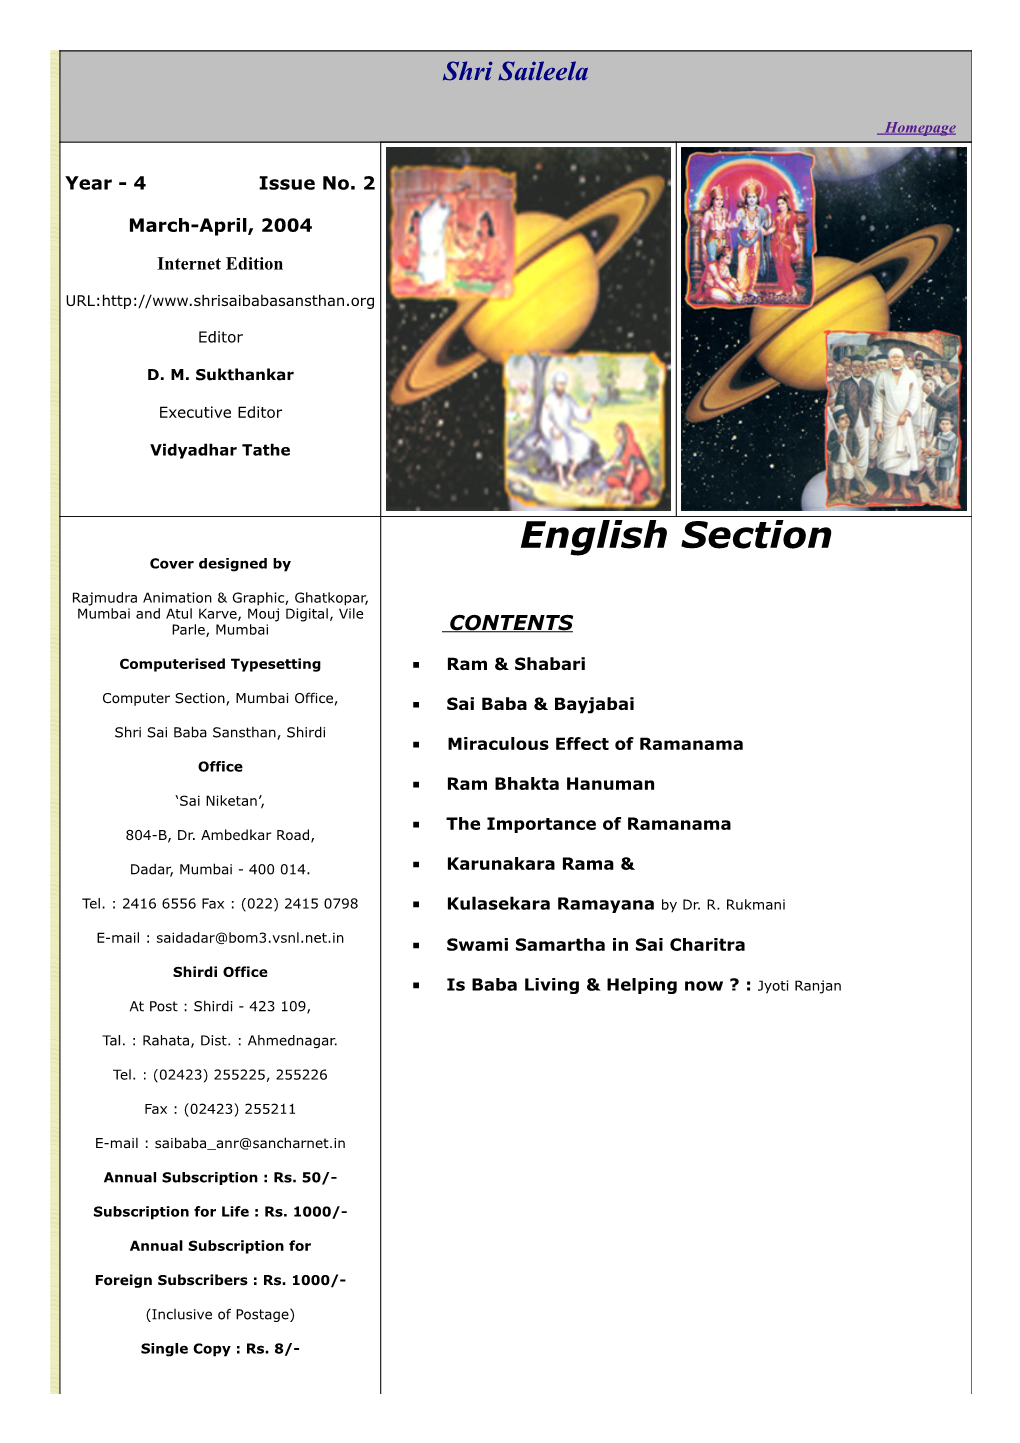 English Section Cover Designed By